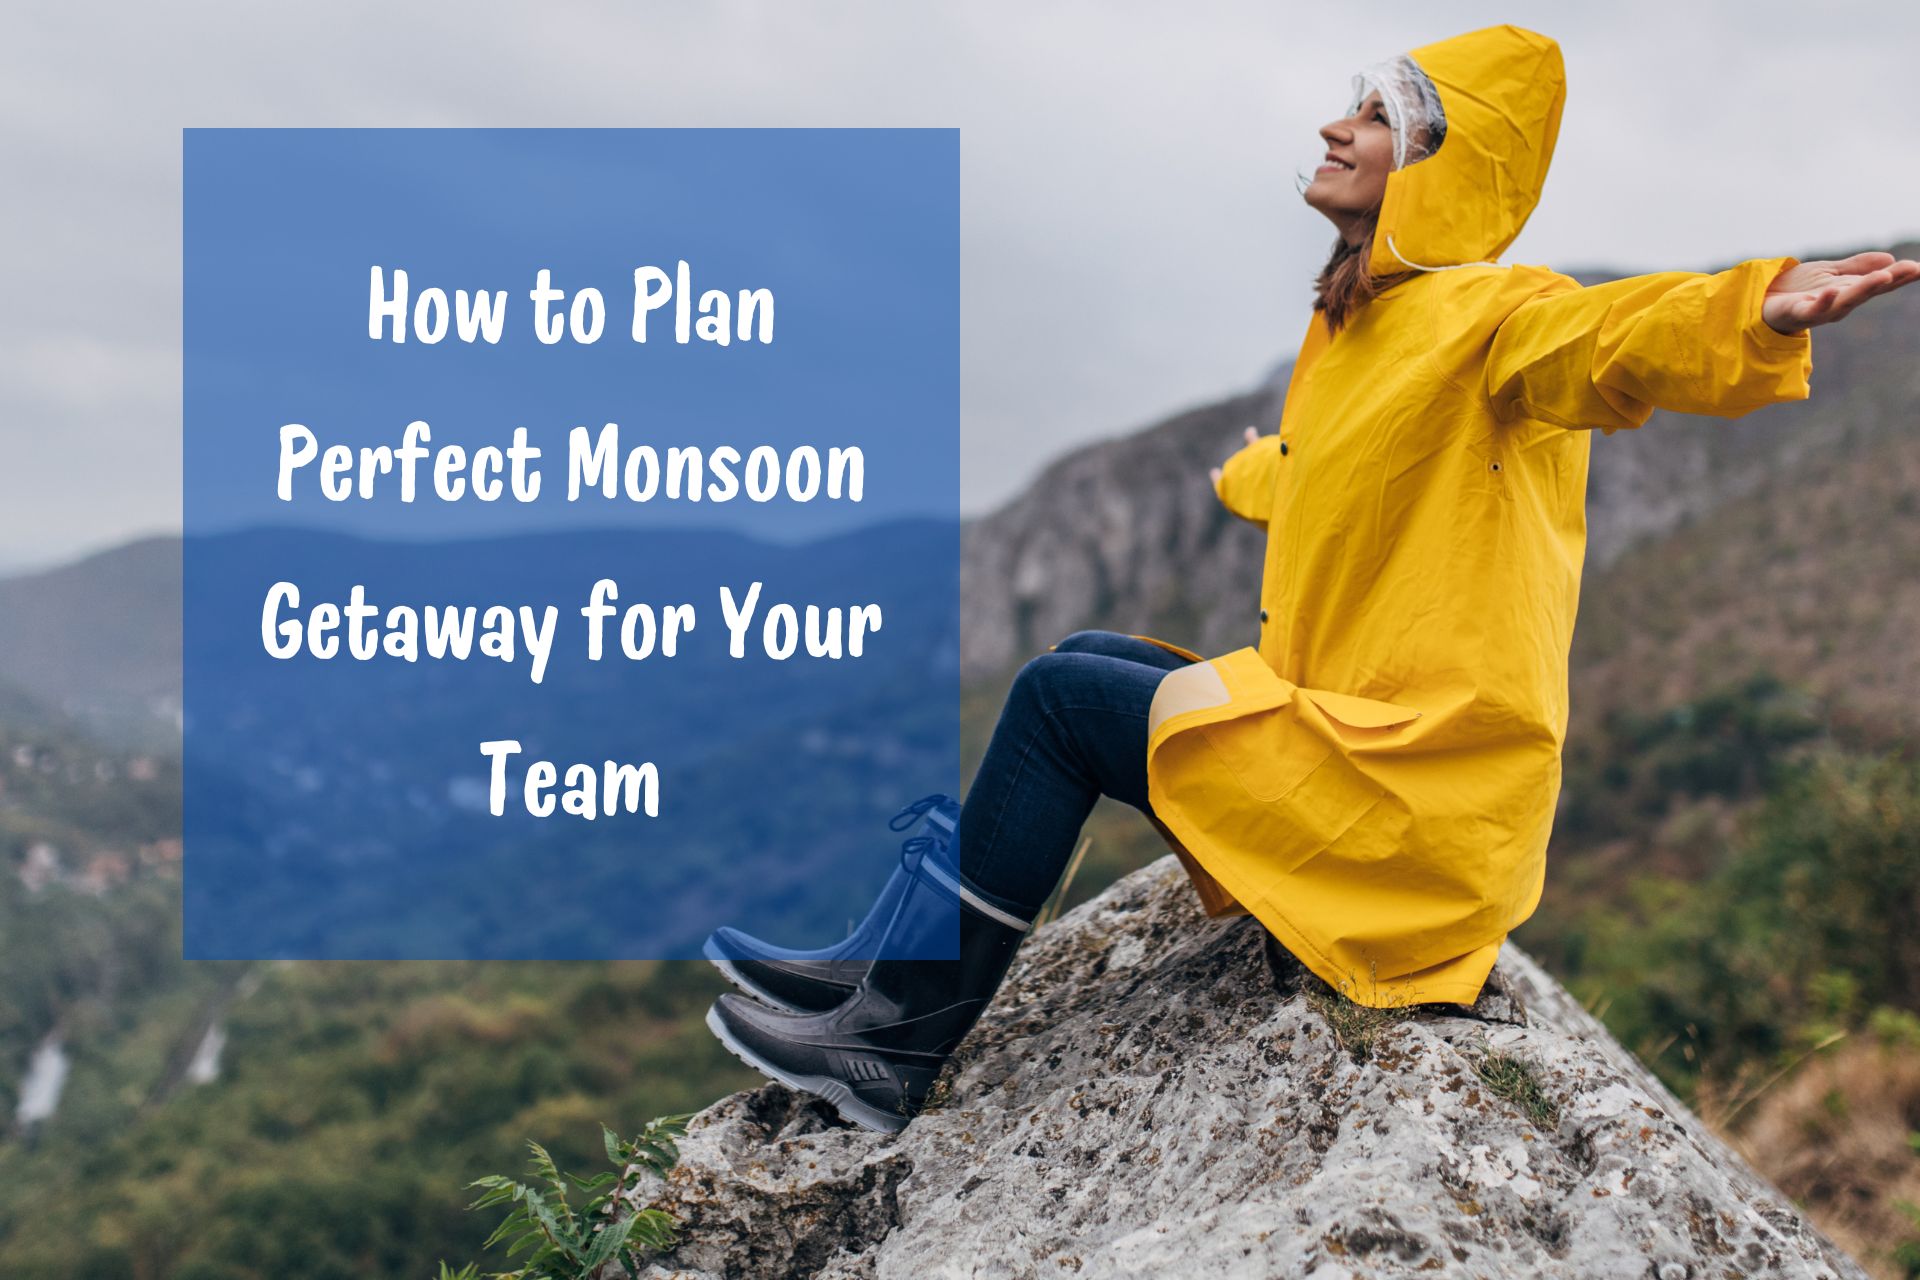 Splash into Fun Planning the Perfect Monsoon Getaway for Your Team